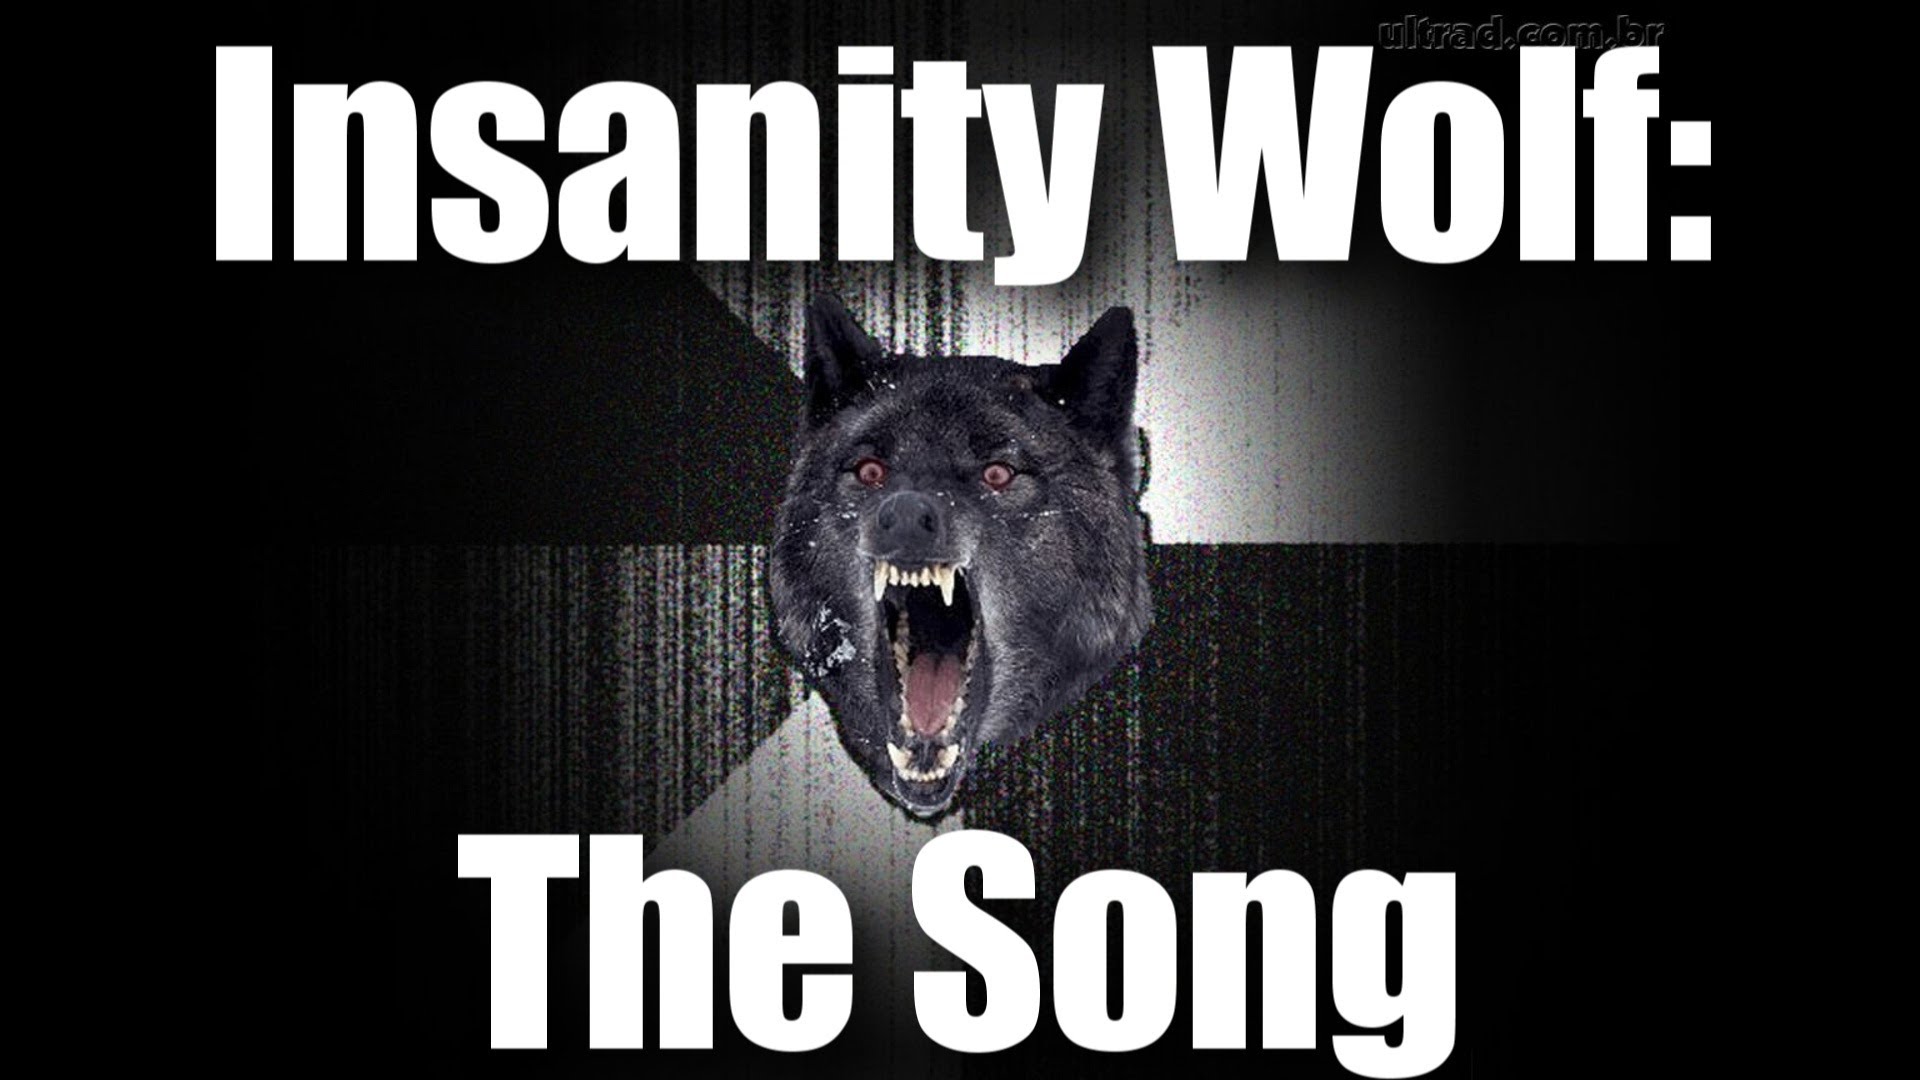 Insanity Wolf Christmas Meme - Festival Collections. 